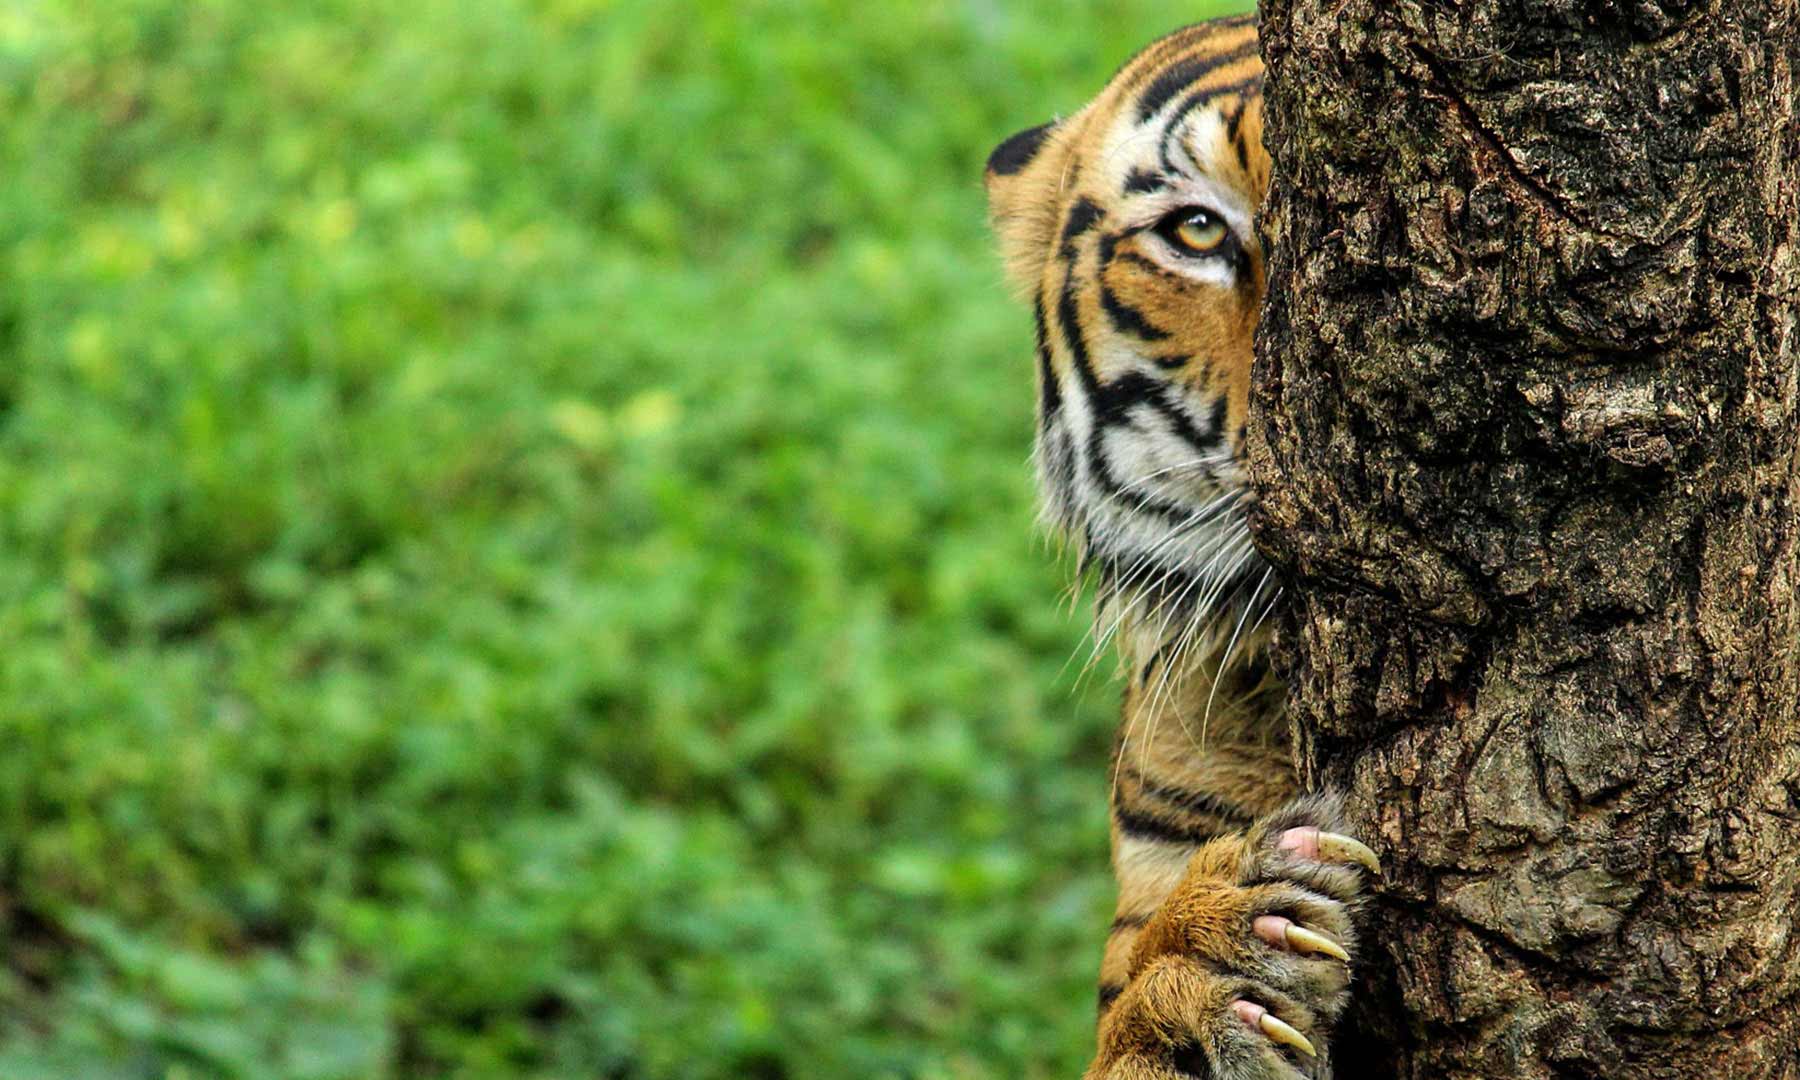 Come experience Pench National Park & a chance to meet Sher Khan !